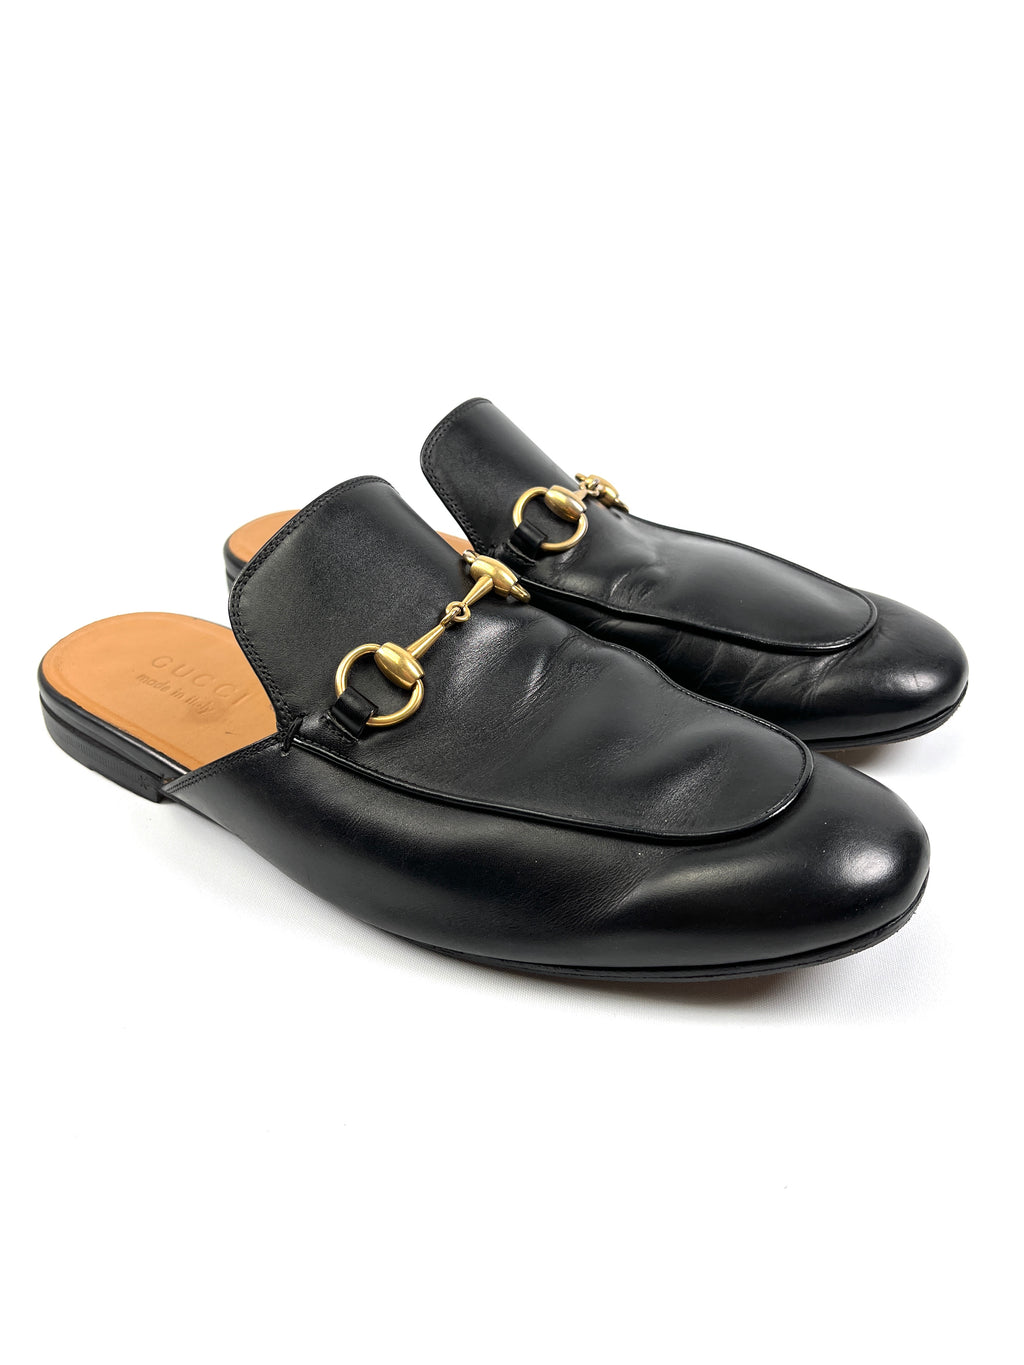 GUCCI - BLACK LEATHER PRINCETOWN SLIP-ON LOAFERS - 7 US MENS